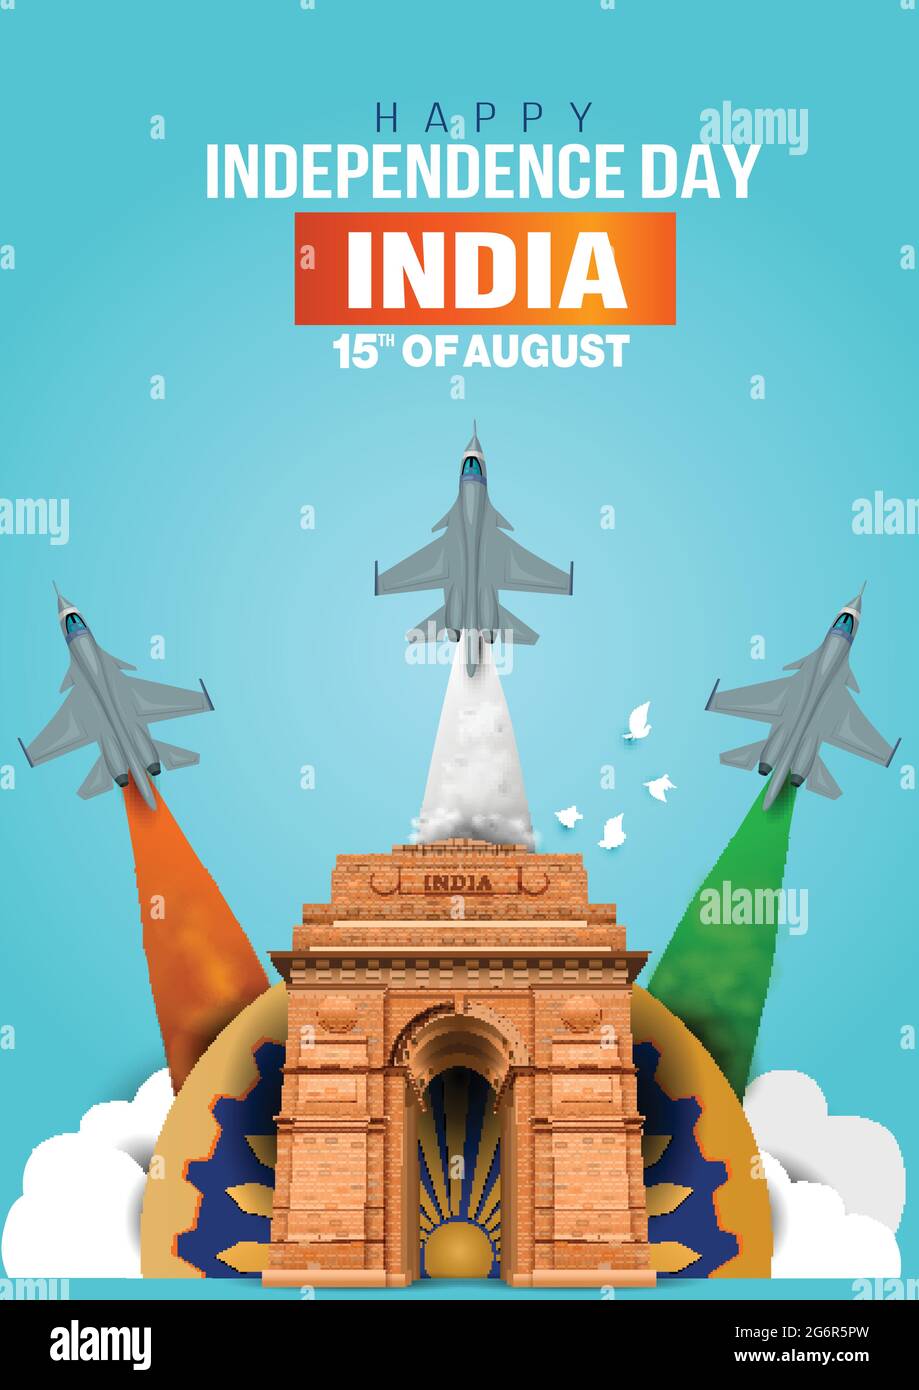 Happy Independence Day India concept with vector illustration of fighter jets and Indian flag colors, with blue background. Stock Vector